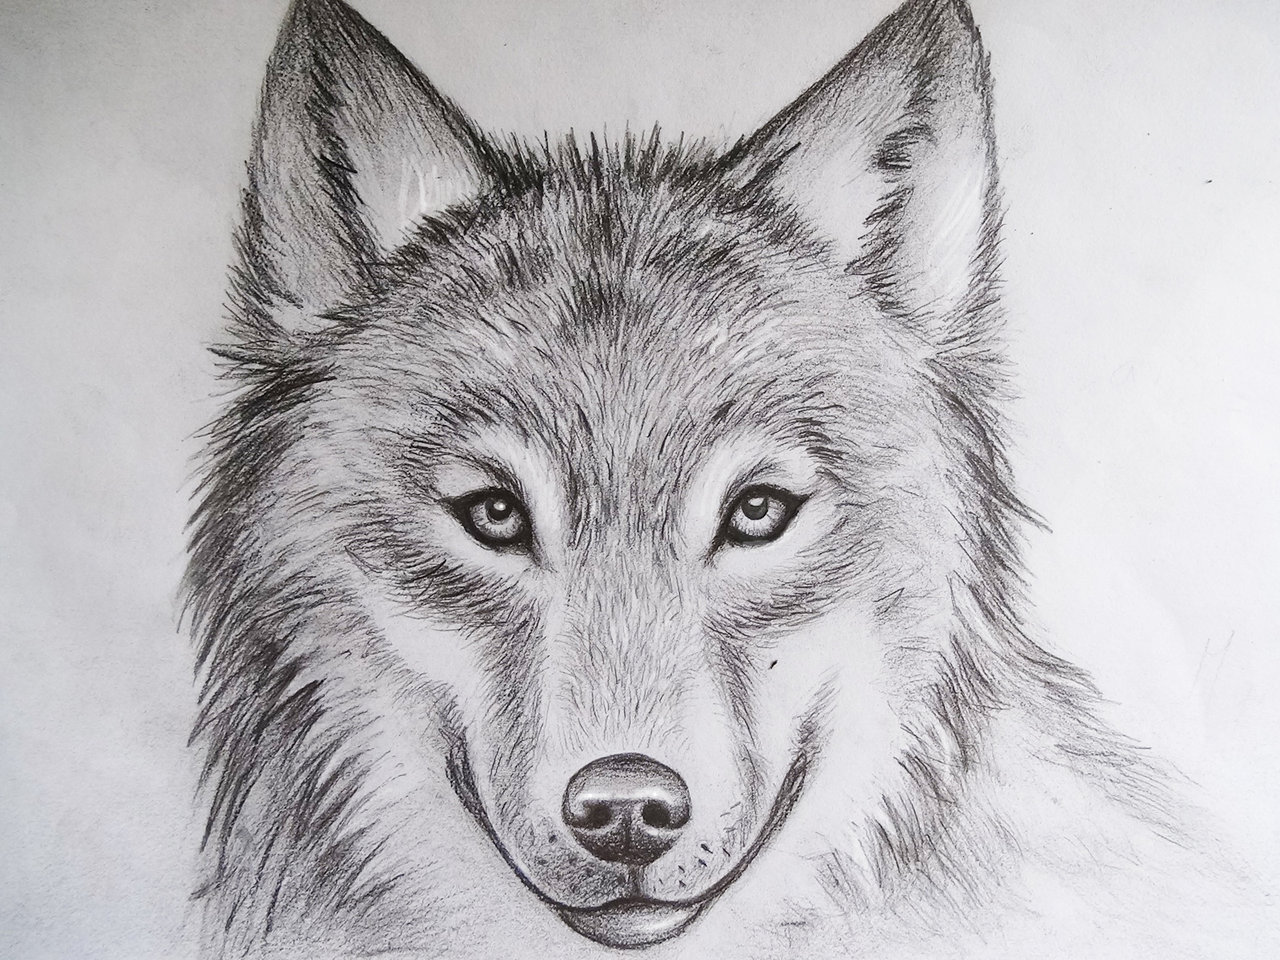 Free Wolf Drawings, Download Free Wolf Drawings png images, Free